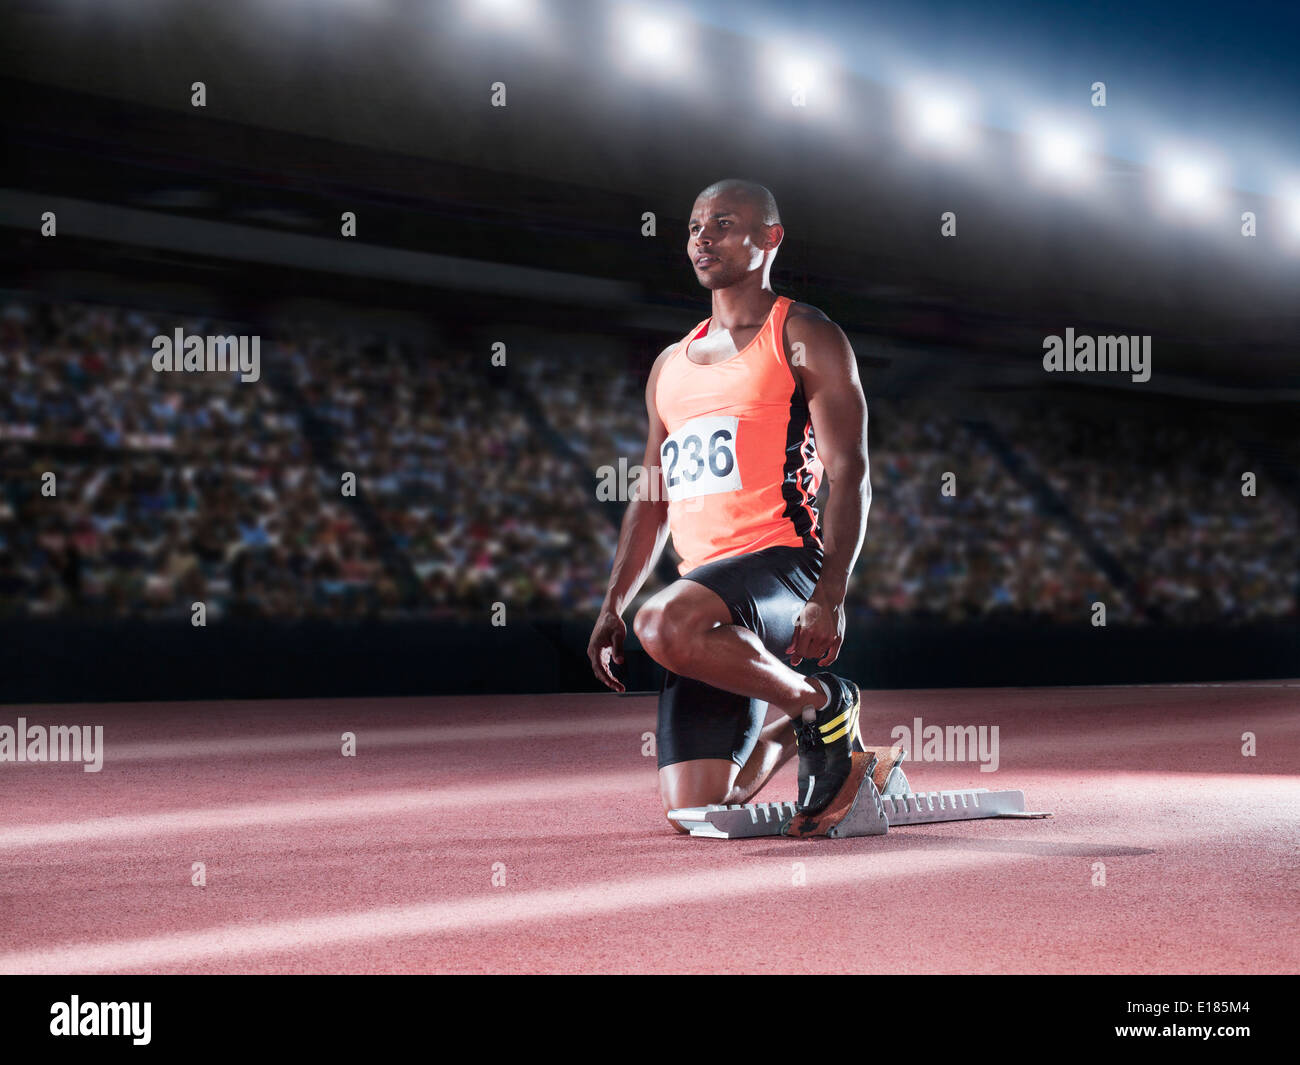 Runner with feet in starting block on track Stock Photo